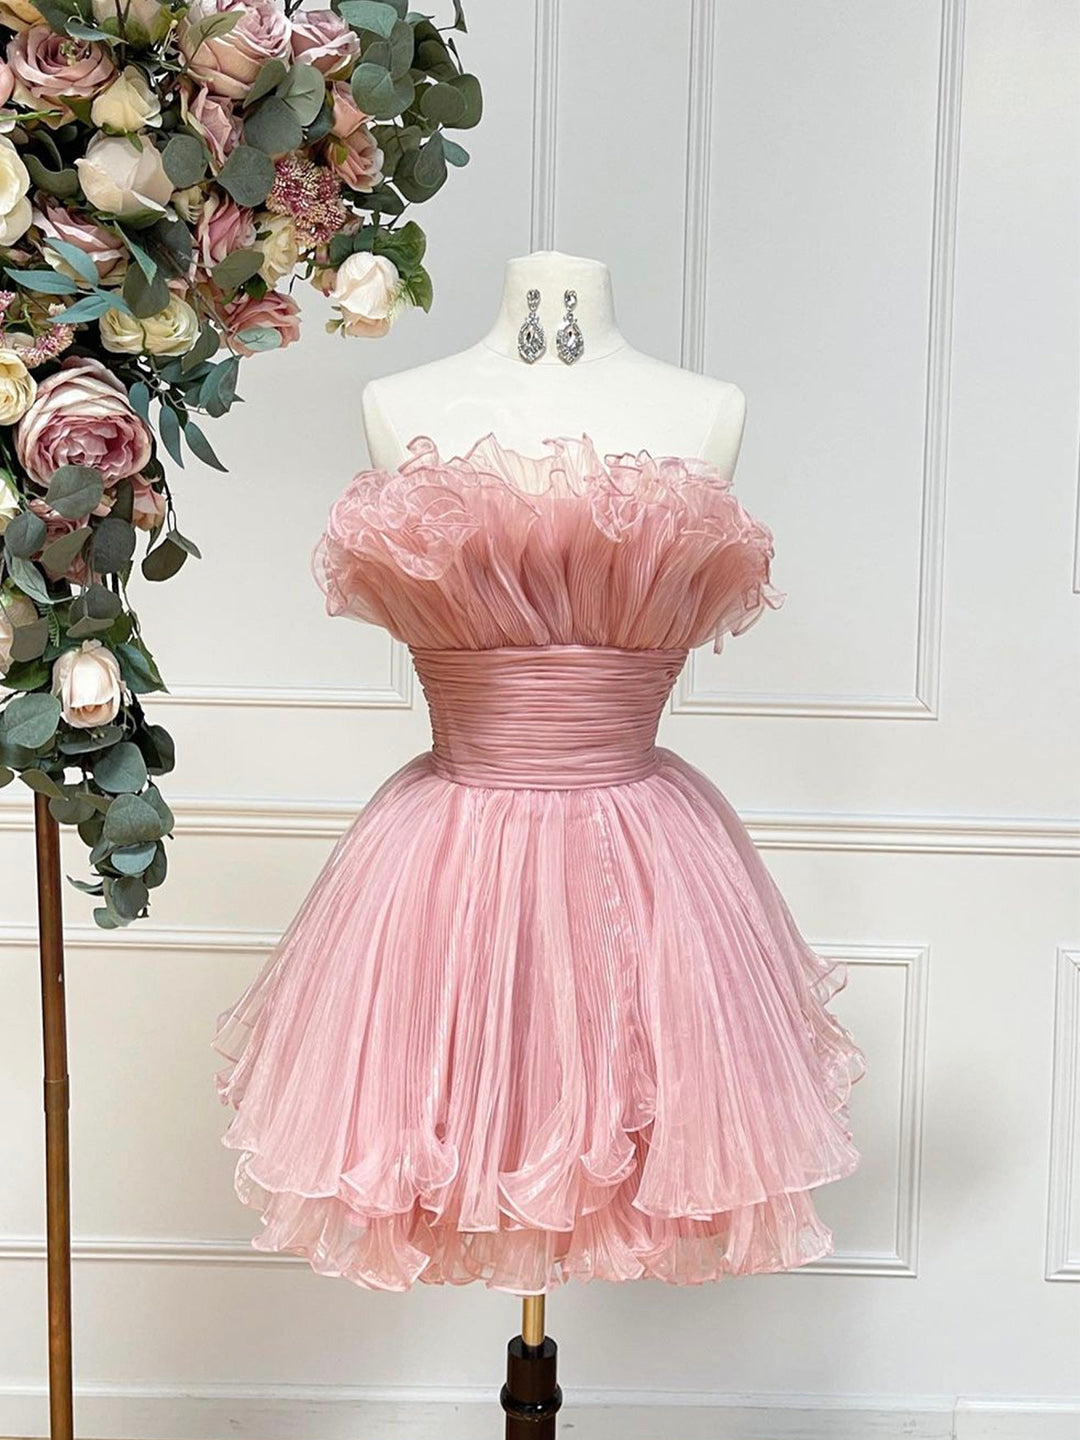 Bridesmaid Dresses Design, Pink Strapless Tulle Short Prom Dress, Cute A-Line Homecoming Dress